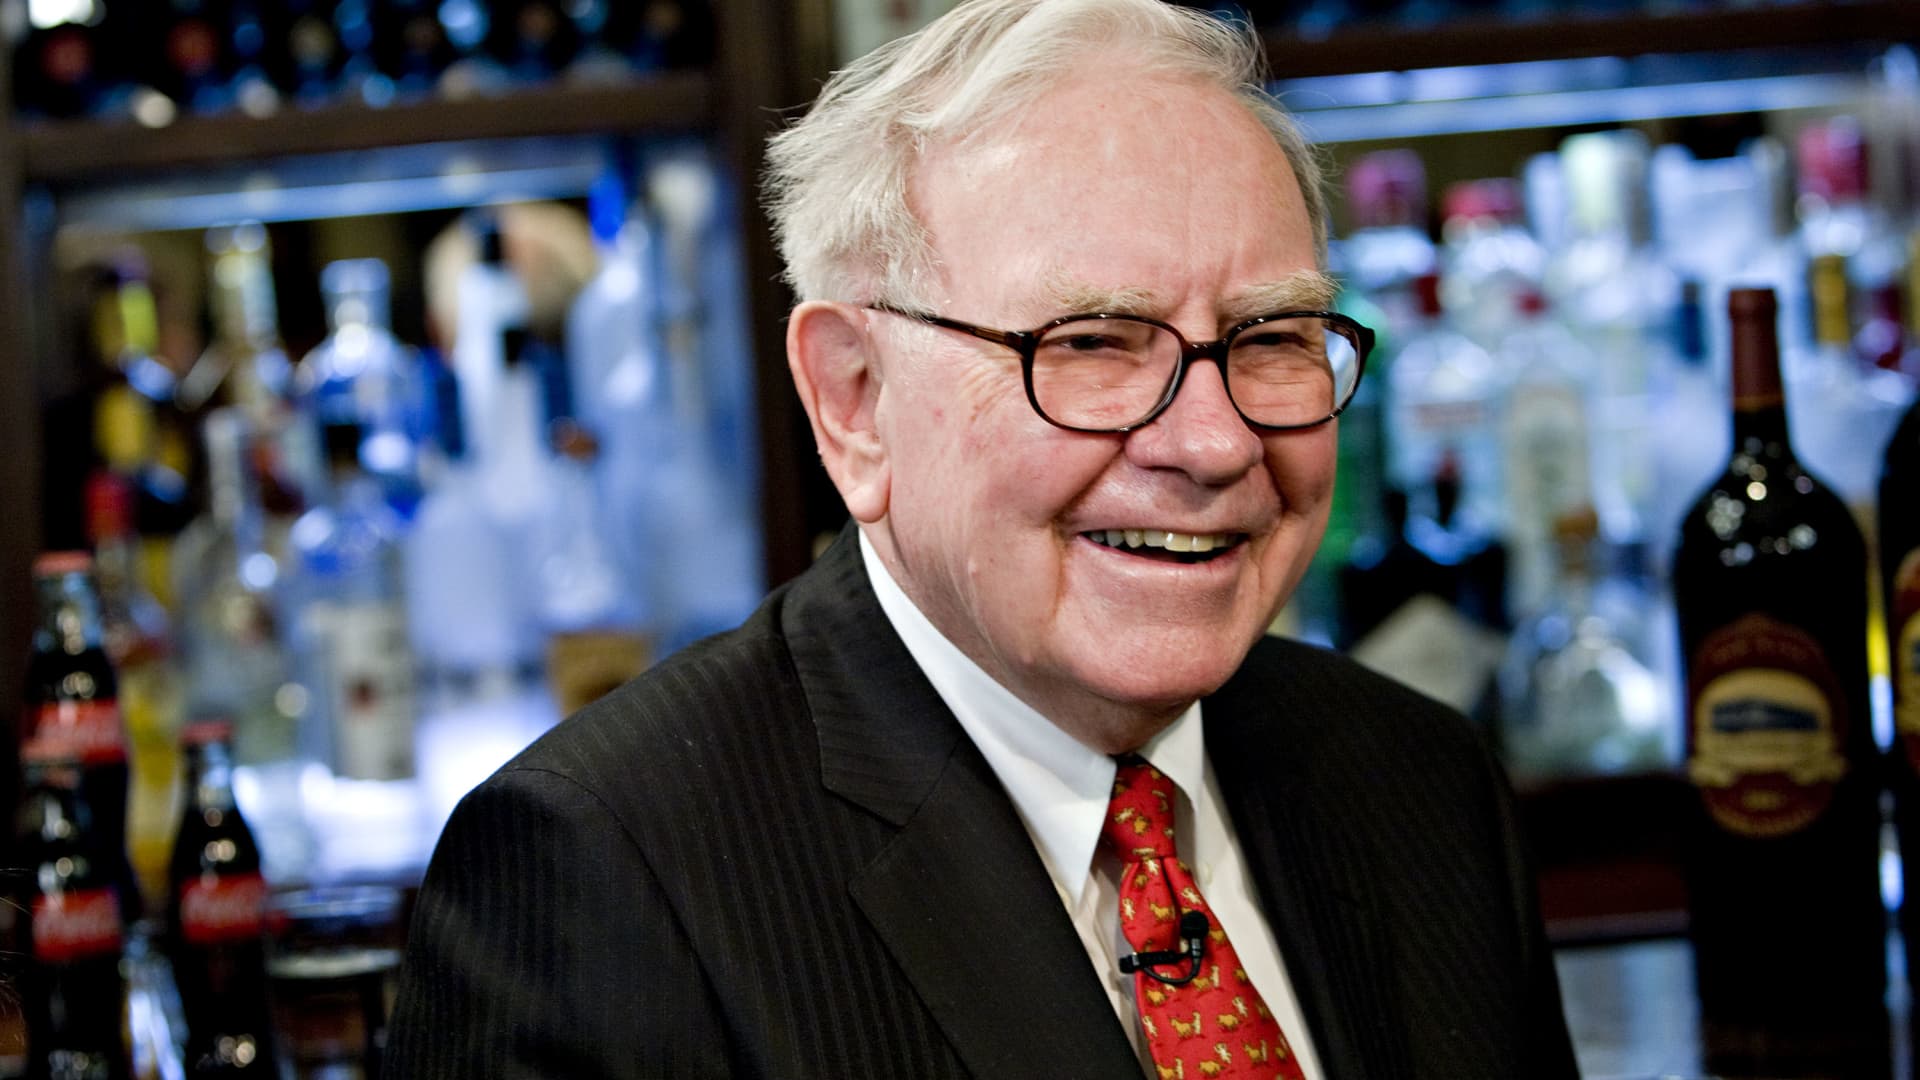 This half-century old fund seeks out global value and has Warren Buffett’s style all over it